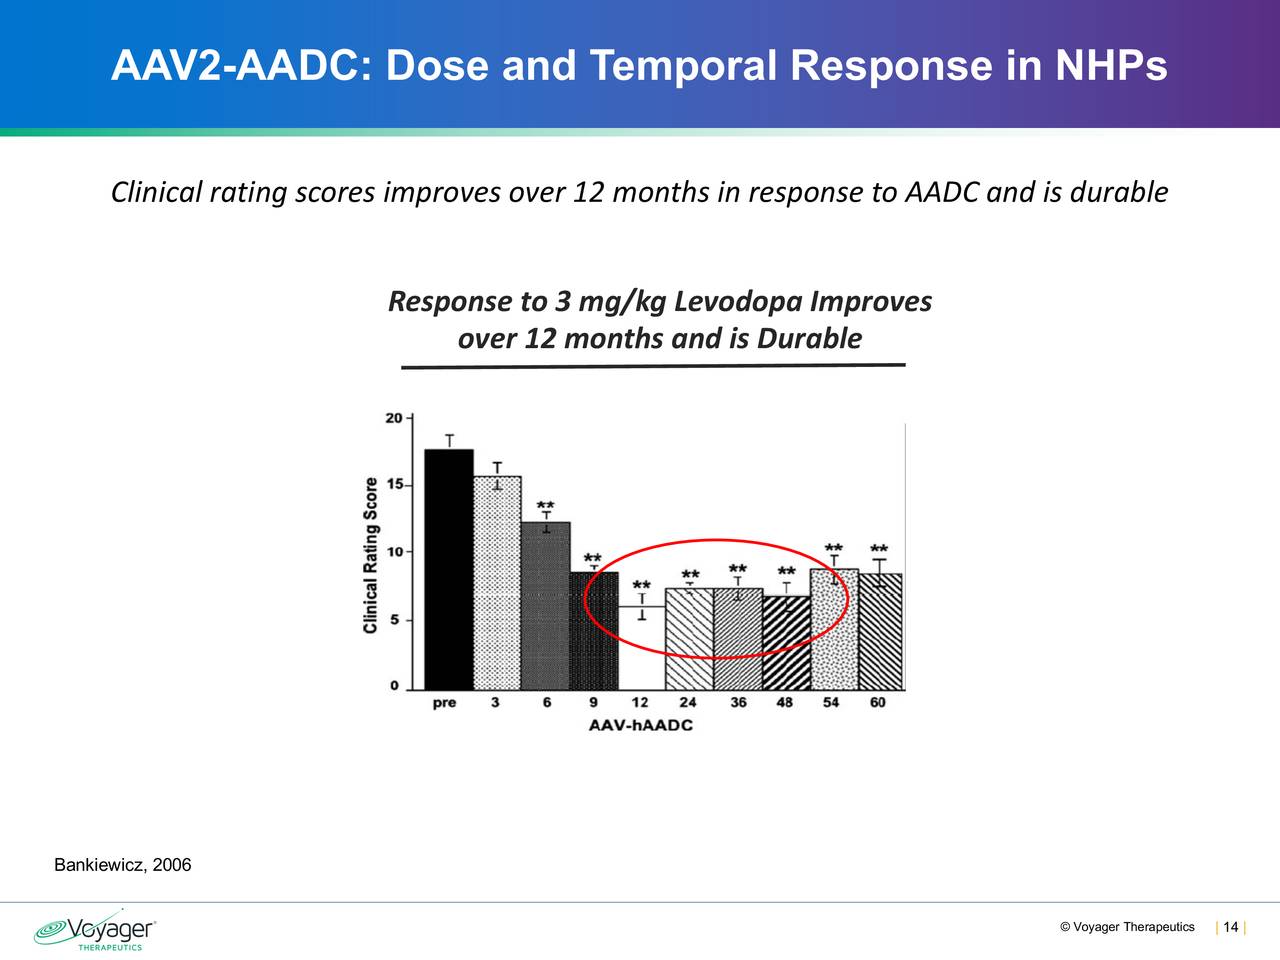 AAV2-AADC: Dose and Temporal Response in NHPs